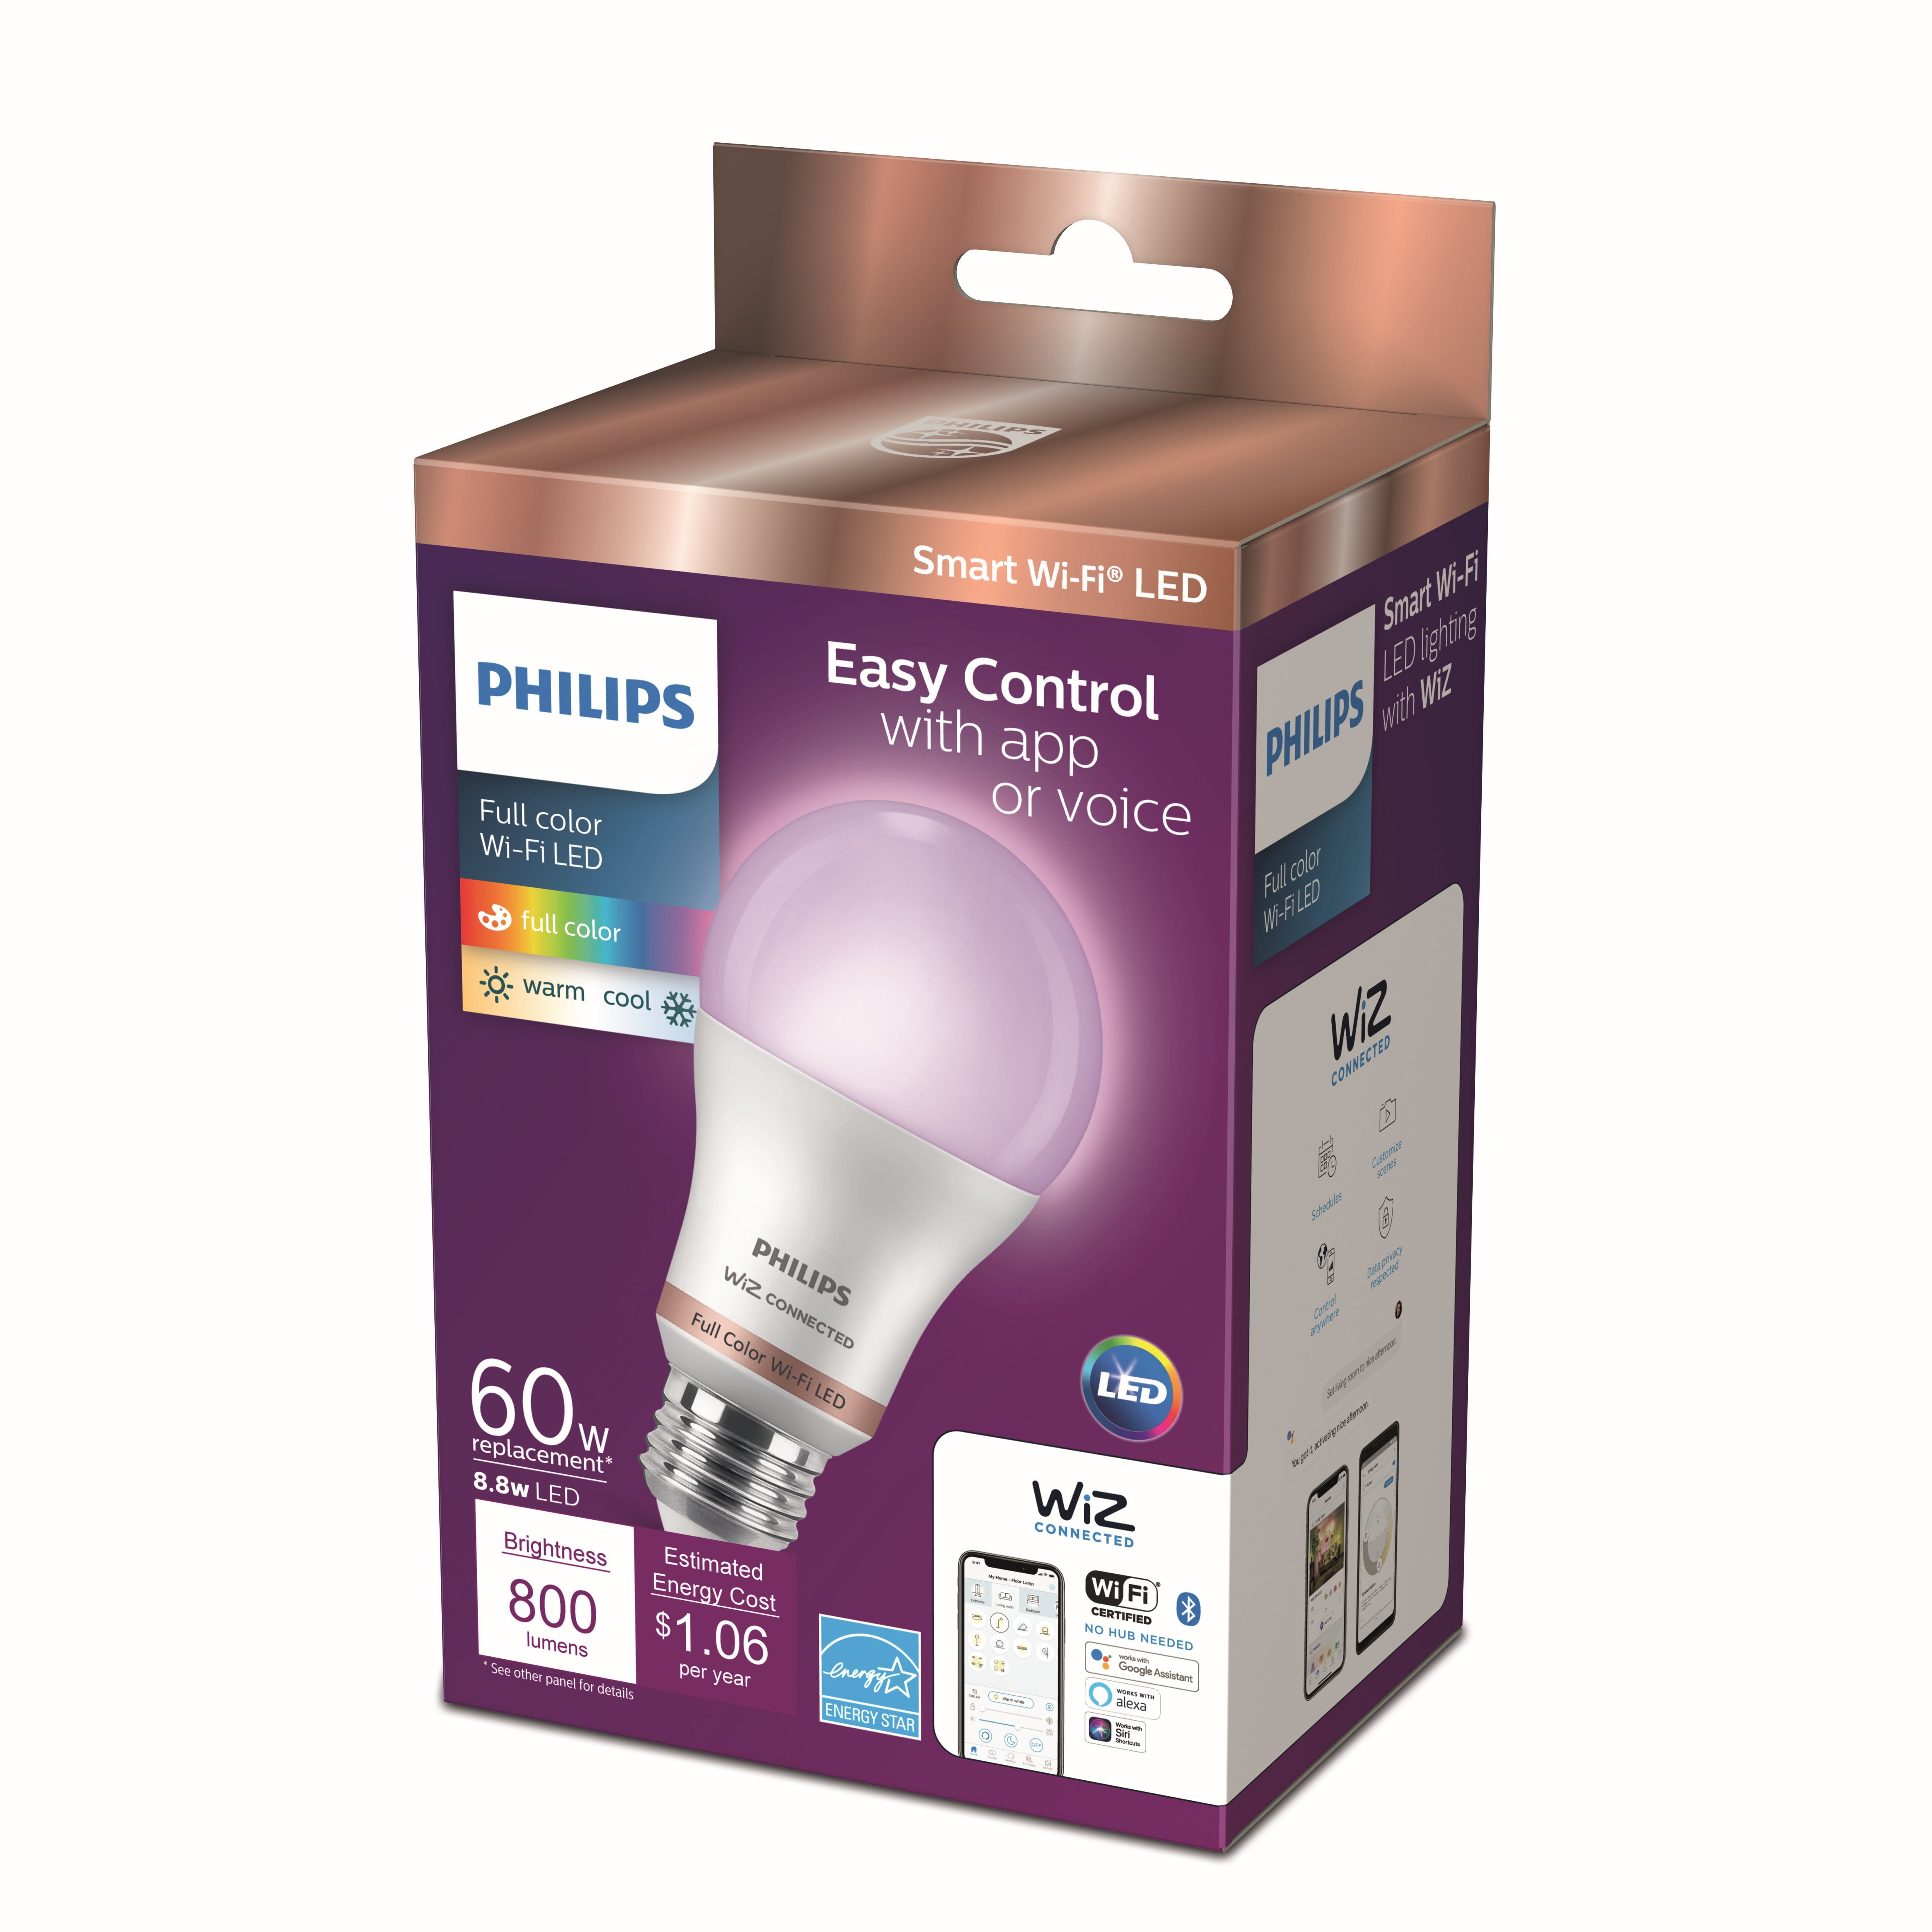 Smart LED A19 General Purpose Light Bulb, Frosted Color & Tunable White, Non-Dimmable, E26 Medium Base (1-Pack) -